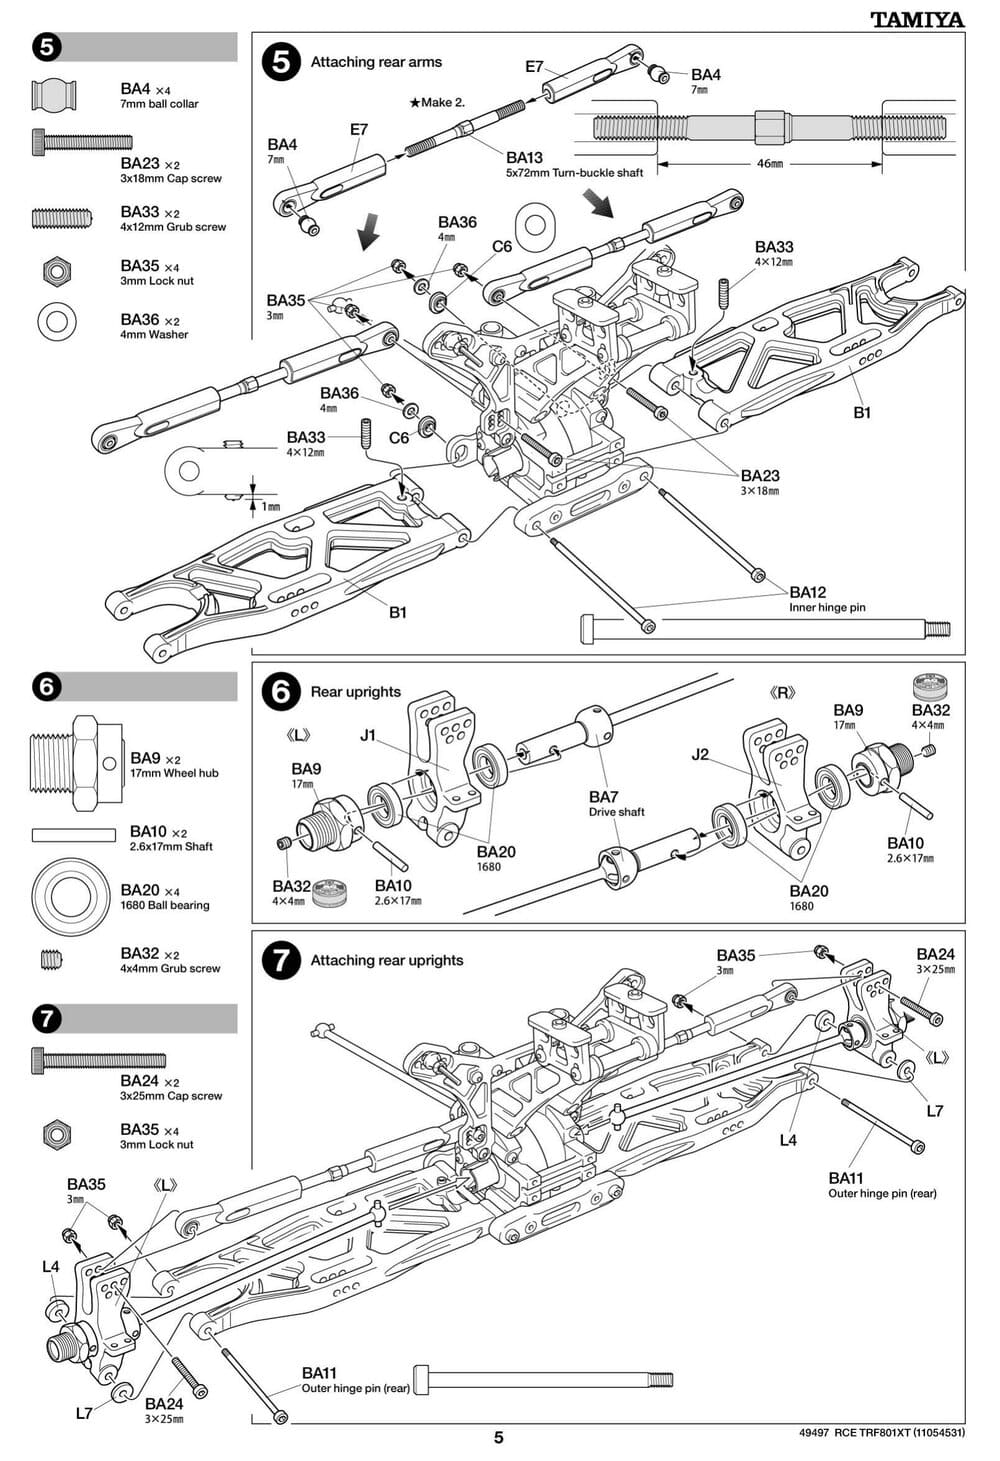 Tamiya - TRF801Xt Performance Package Version Chassis - Manual - Page 5